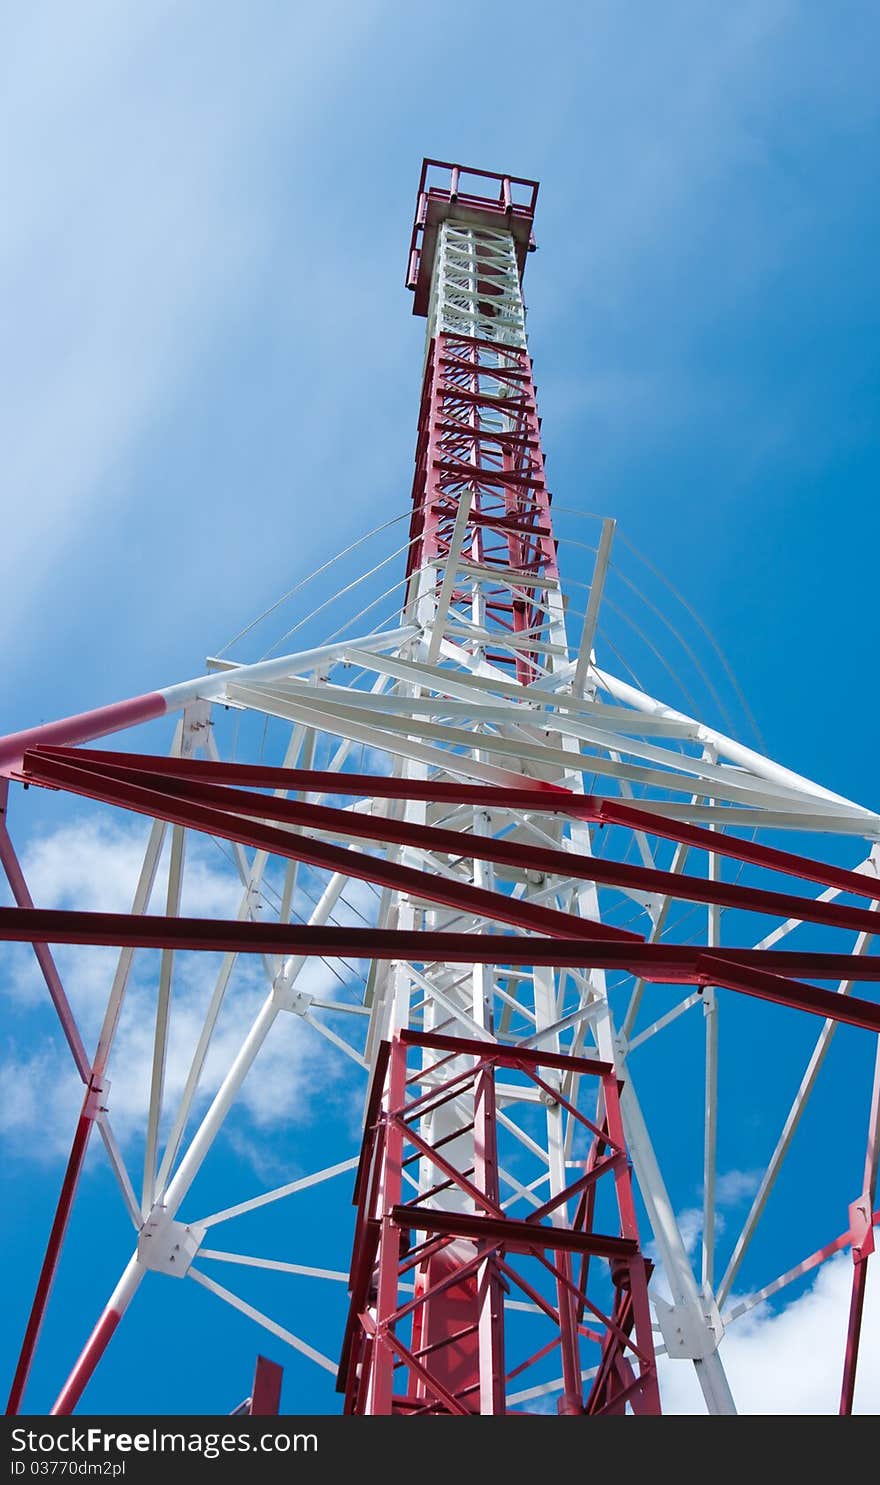 The image of the Mast of communication against the blue sky. The image of the Mast of communication against the blue sky